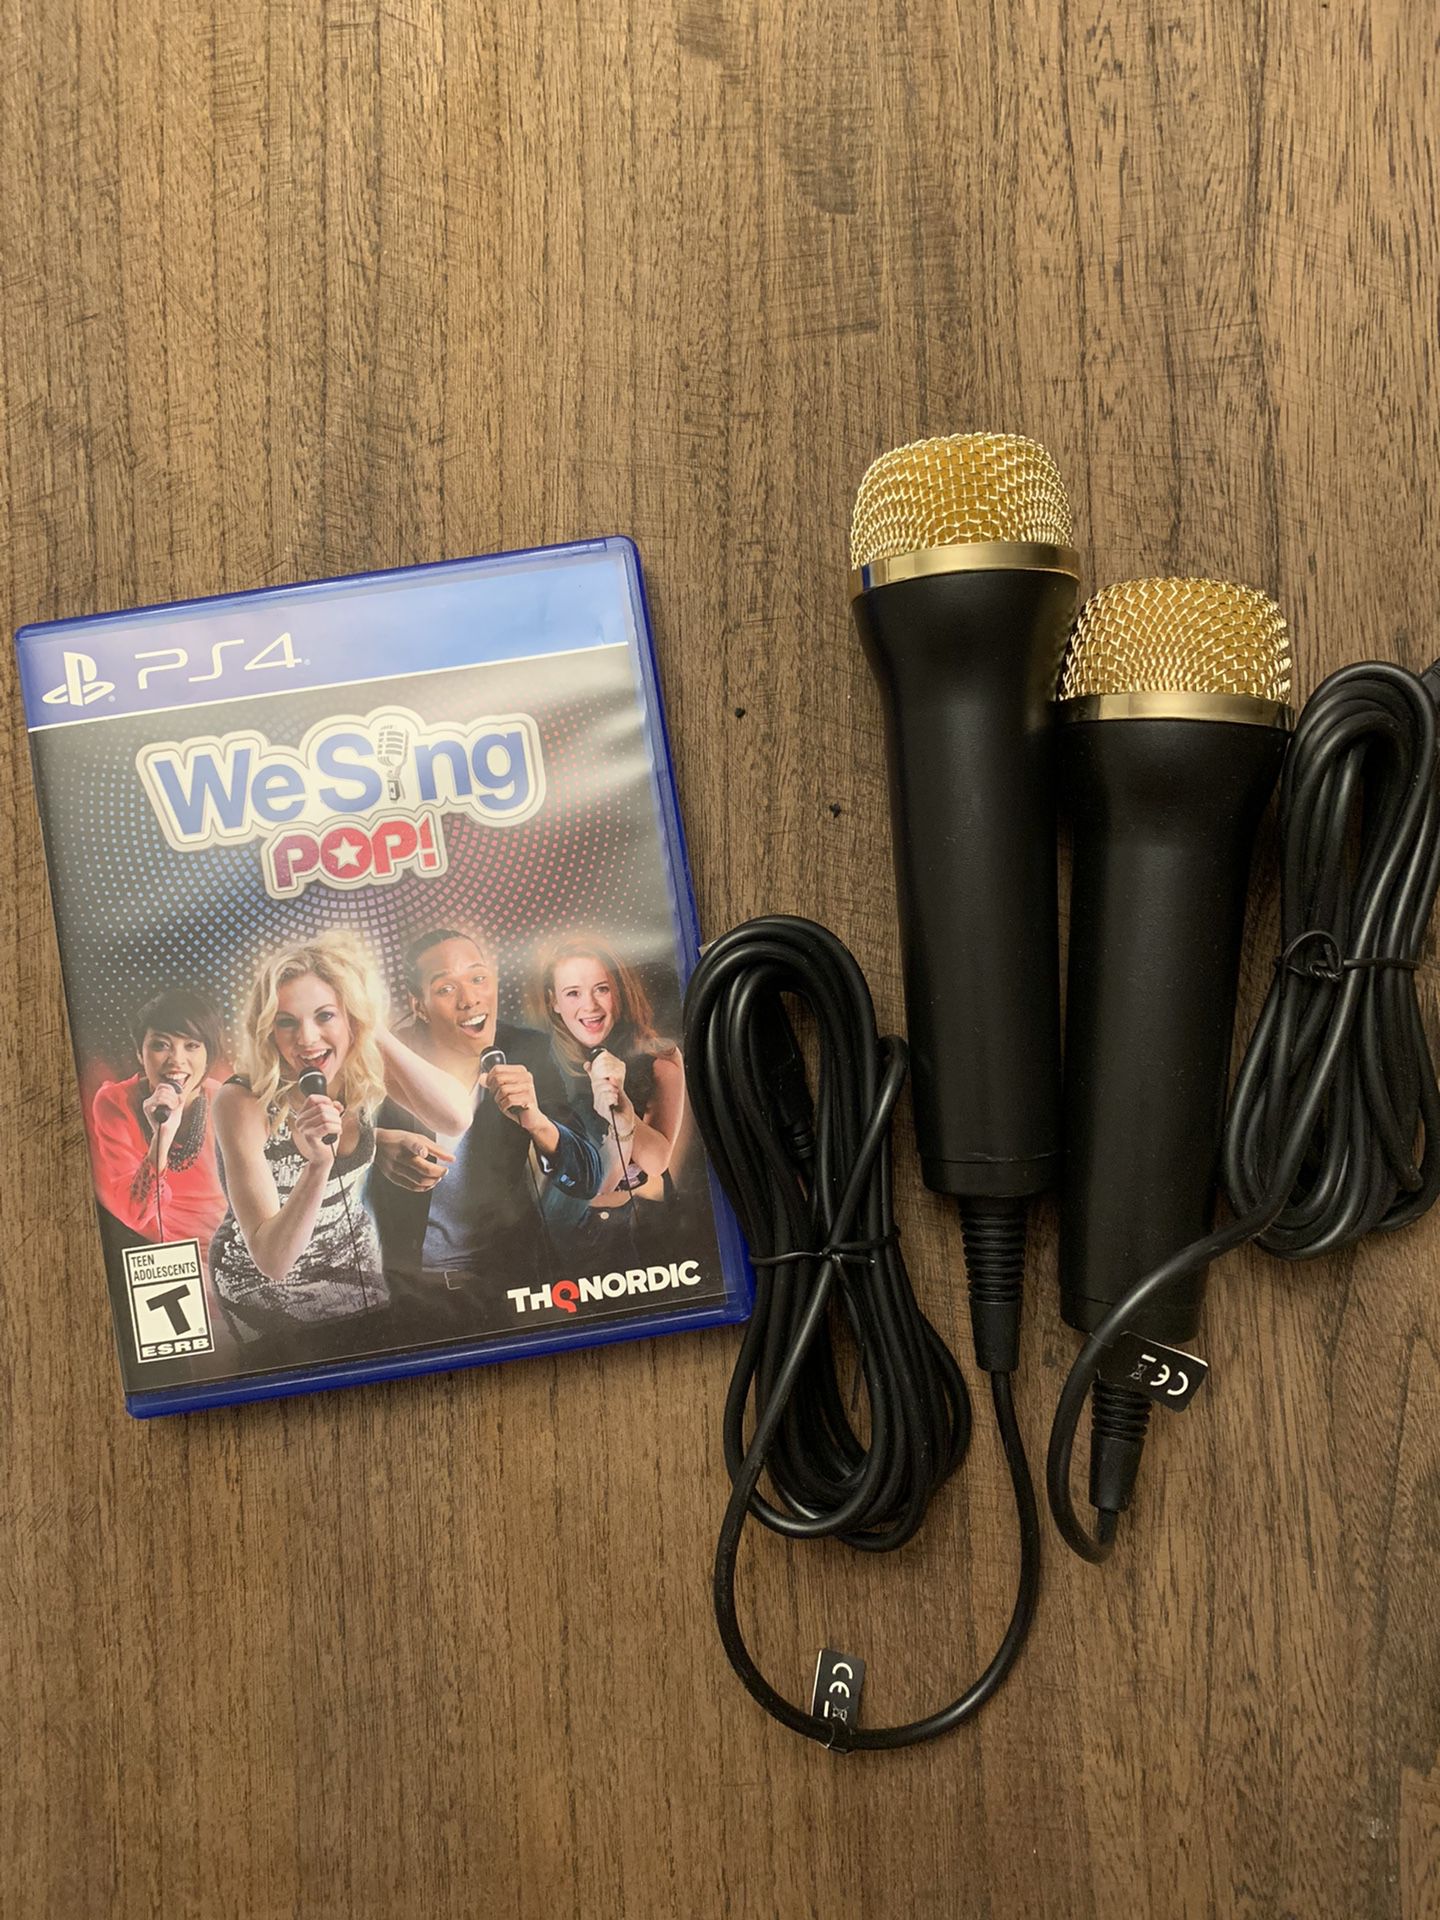 Sing POP! PS4 game Microphones for Sale in Portland, OR - OfferUp